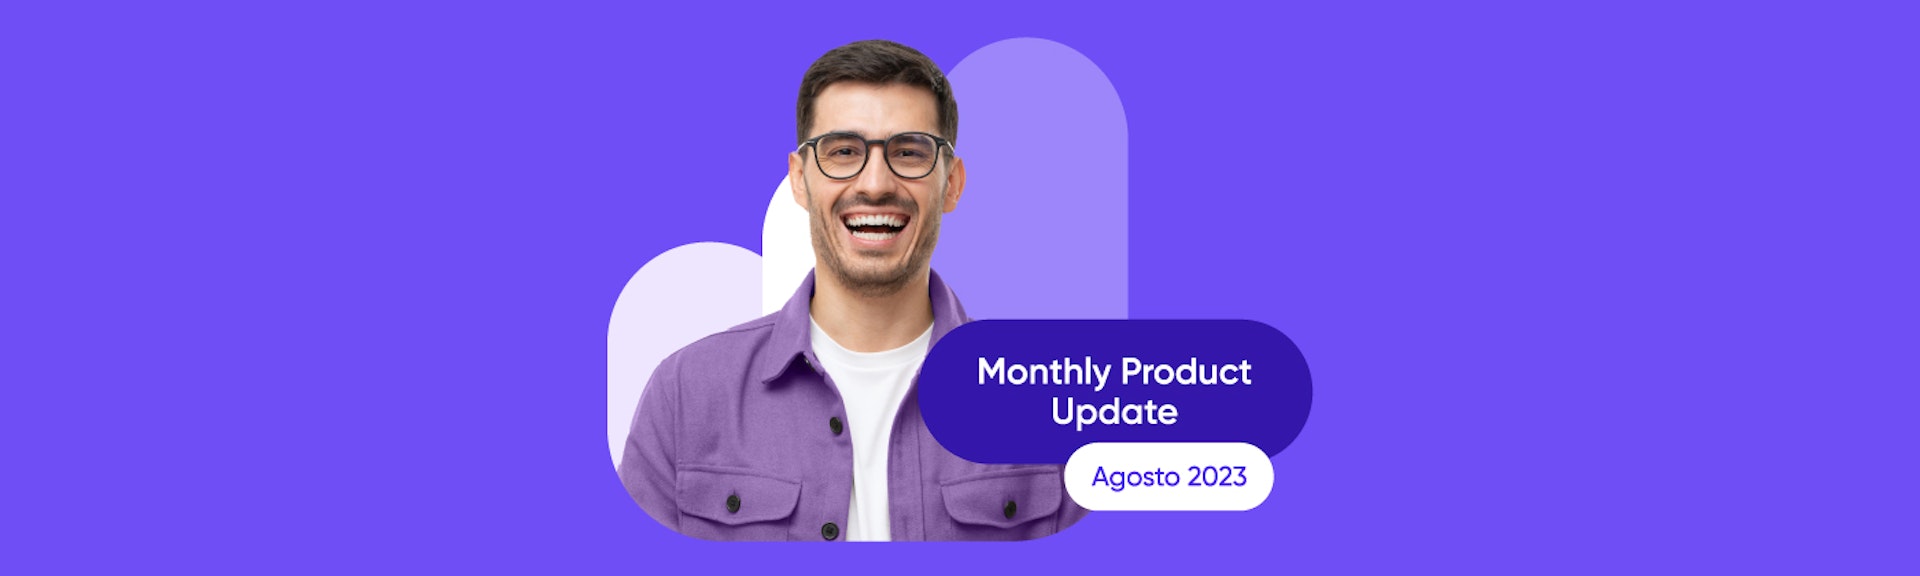 Monthly Product Update: Agosto 2023